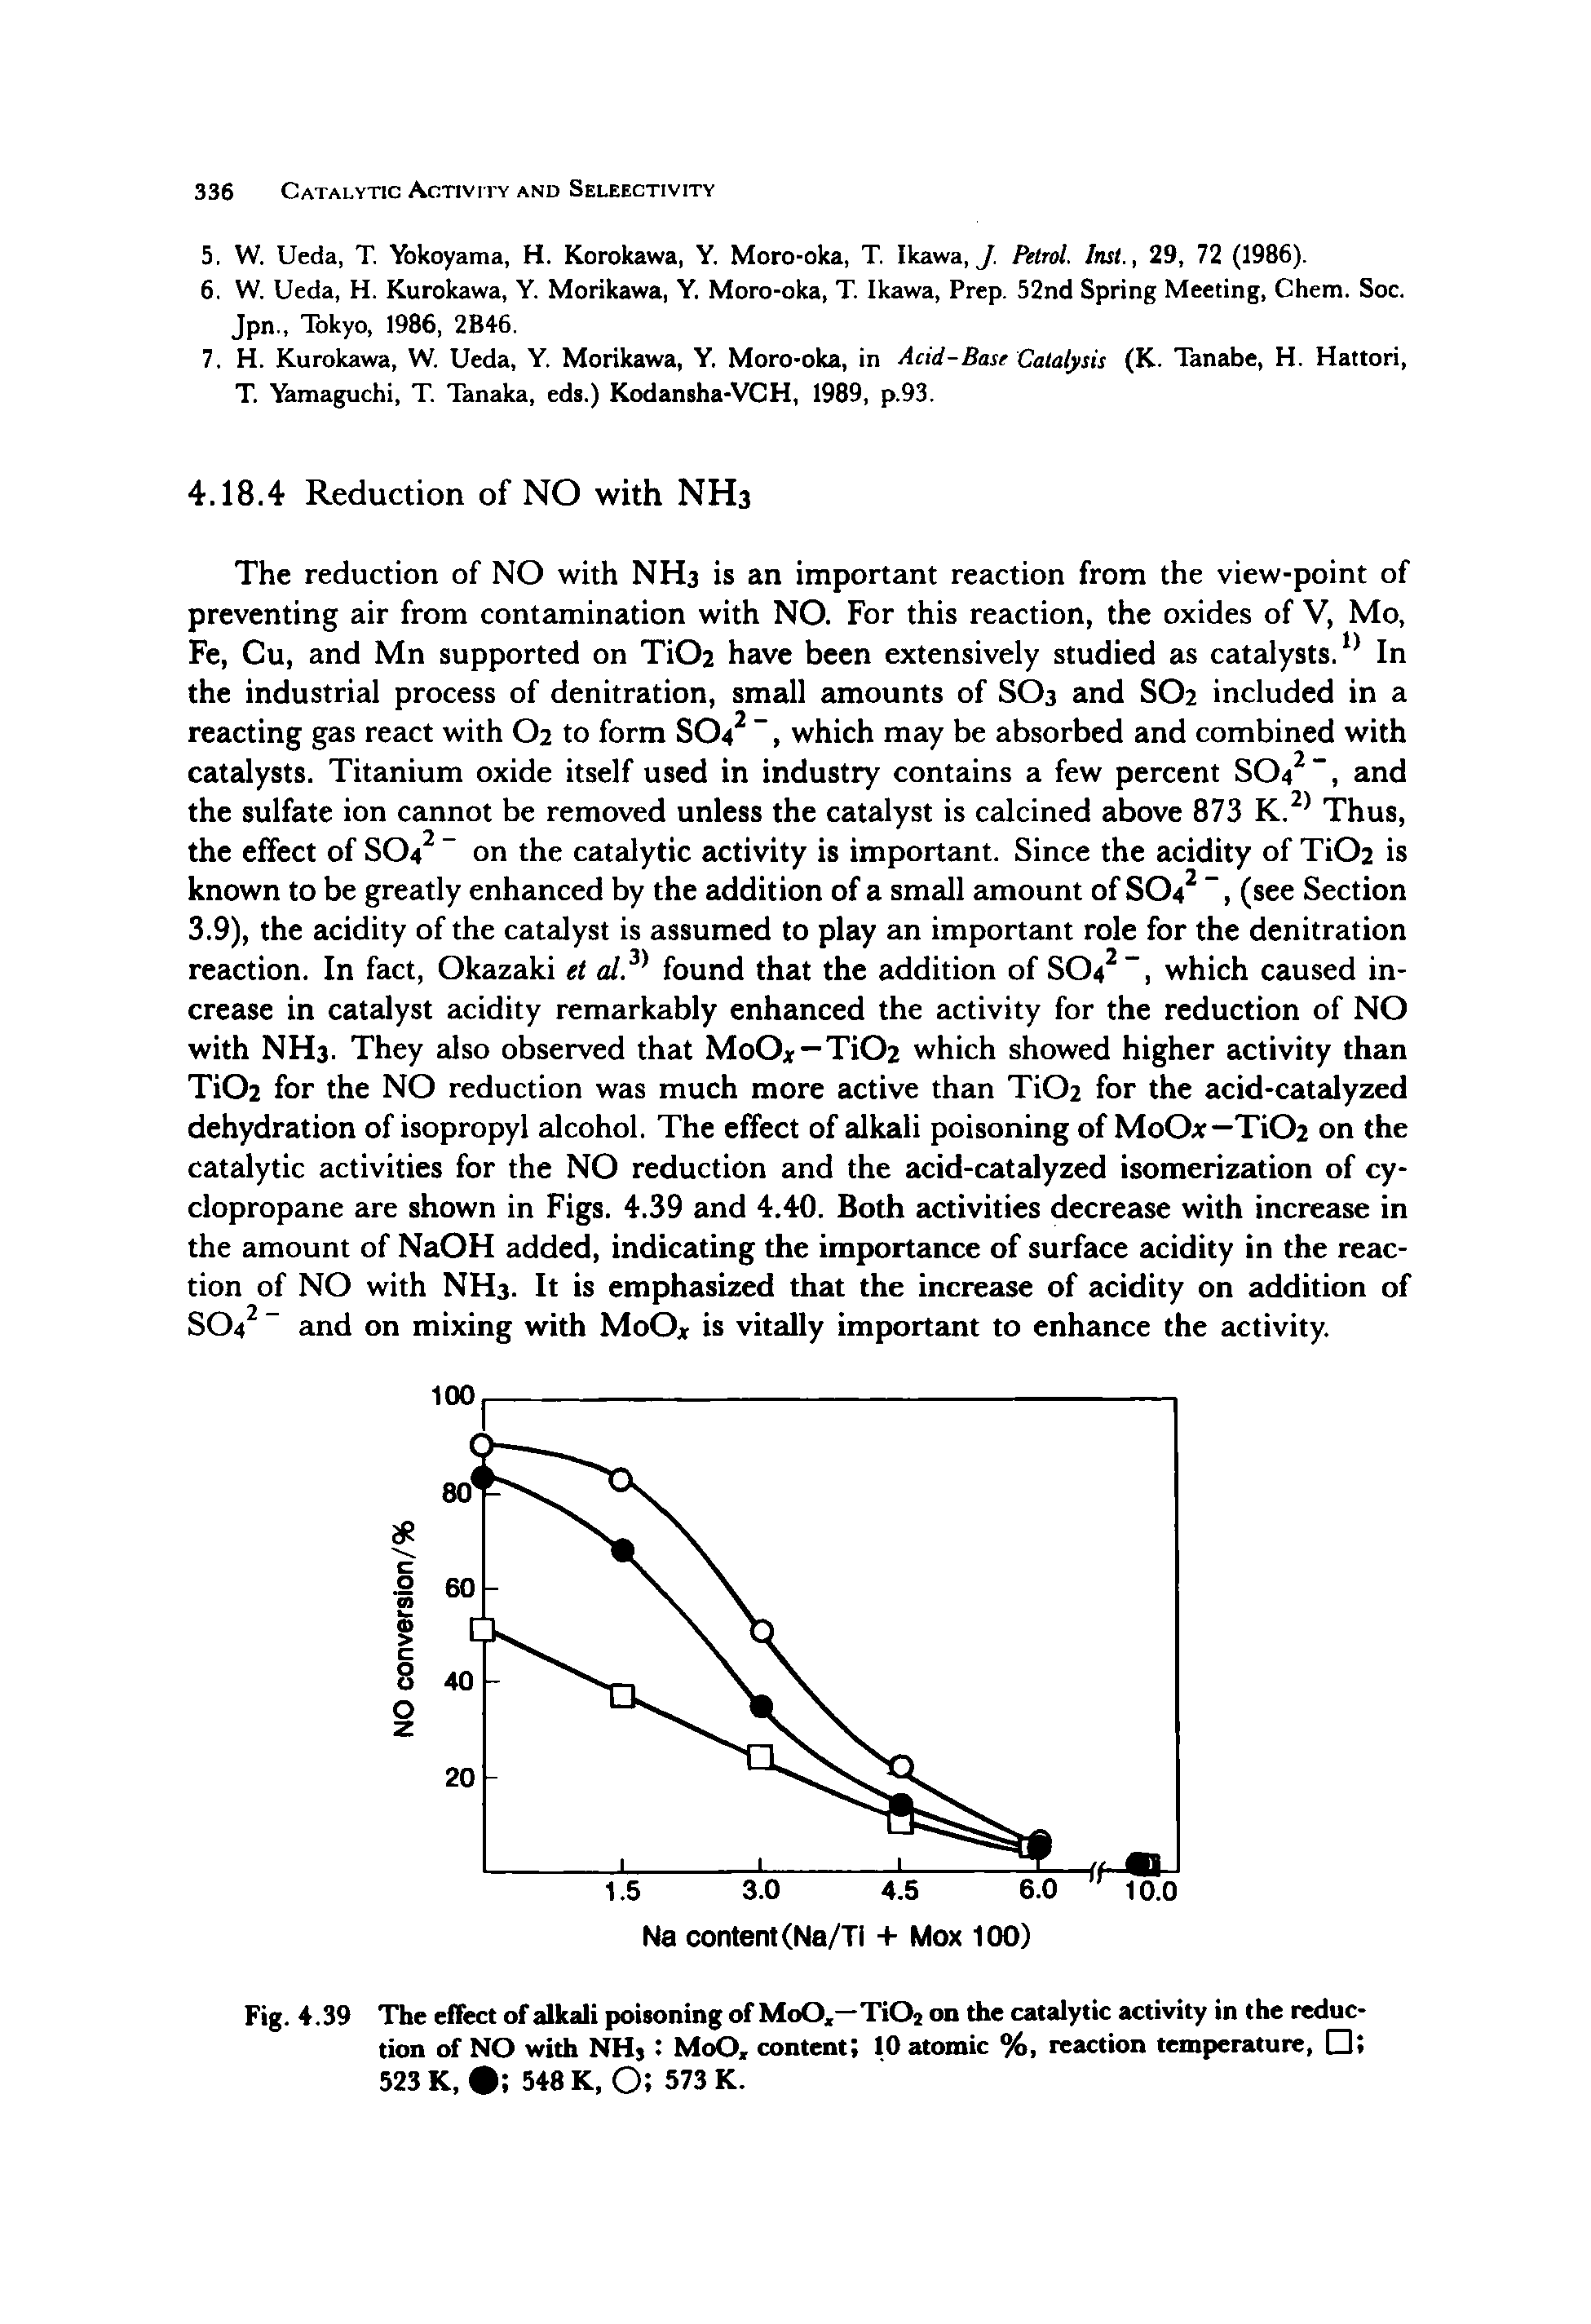 Fig. 4.39 The effect of alkali poisoning of MoO.—TiOj on the catalytic aaivity in the reduction of NO with NHj MoO, content 10 atomic %, reaction temperature, 523 K, 548 K, 0 573 K.